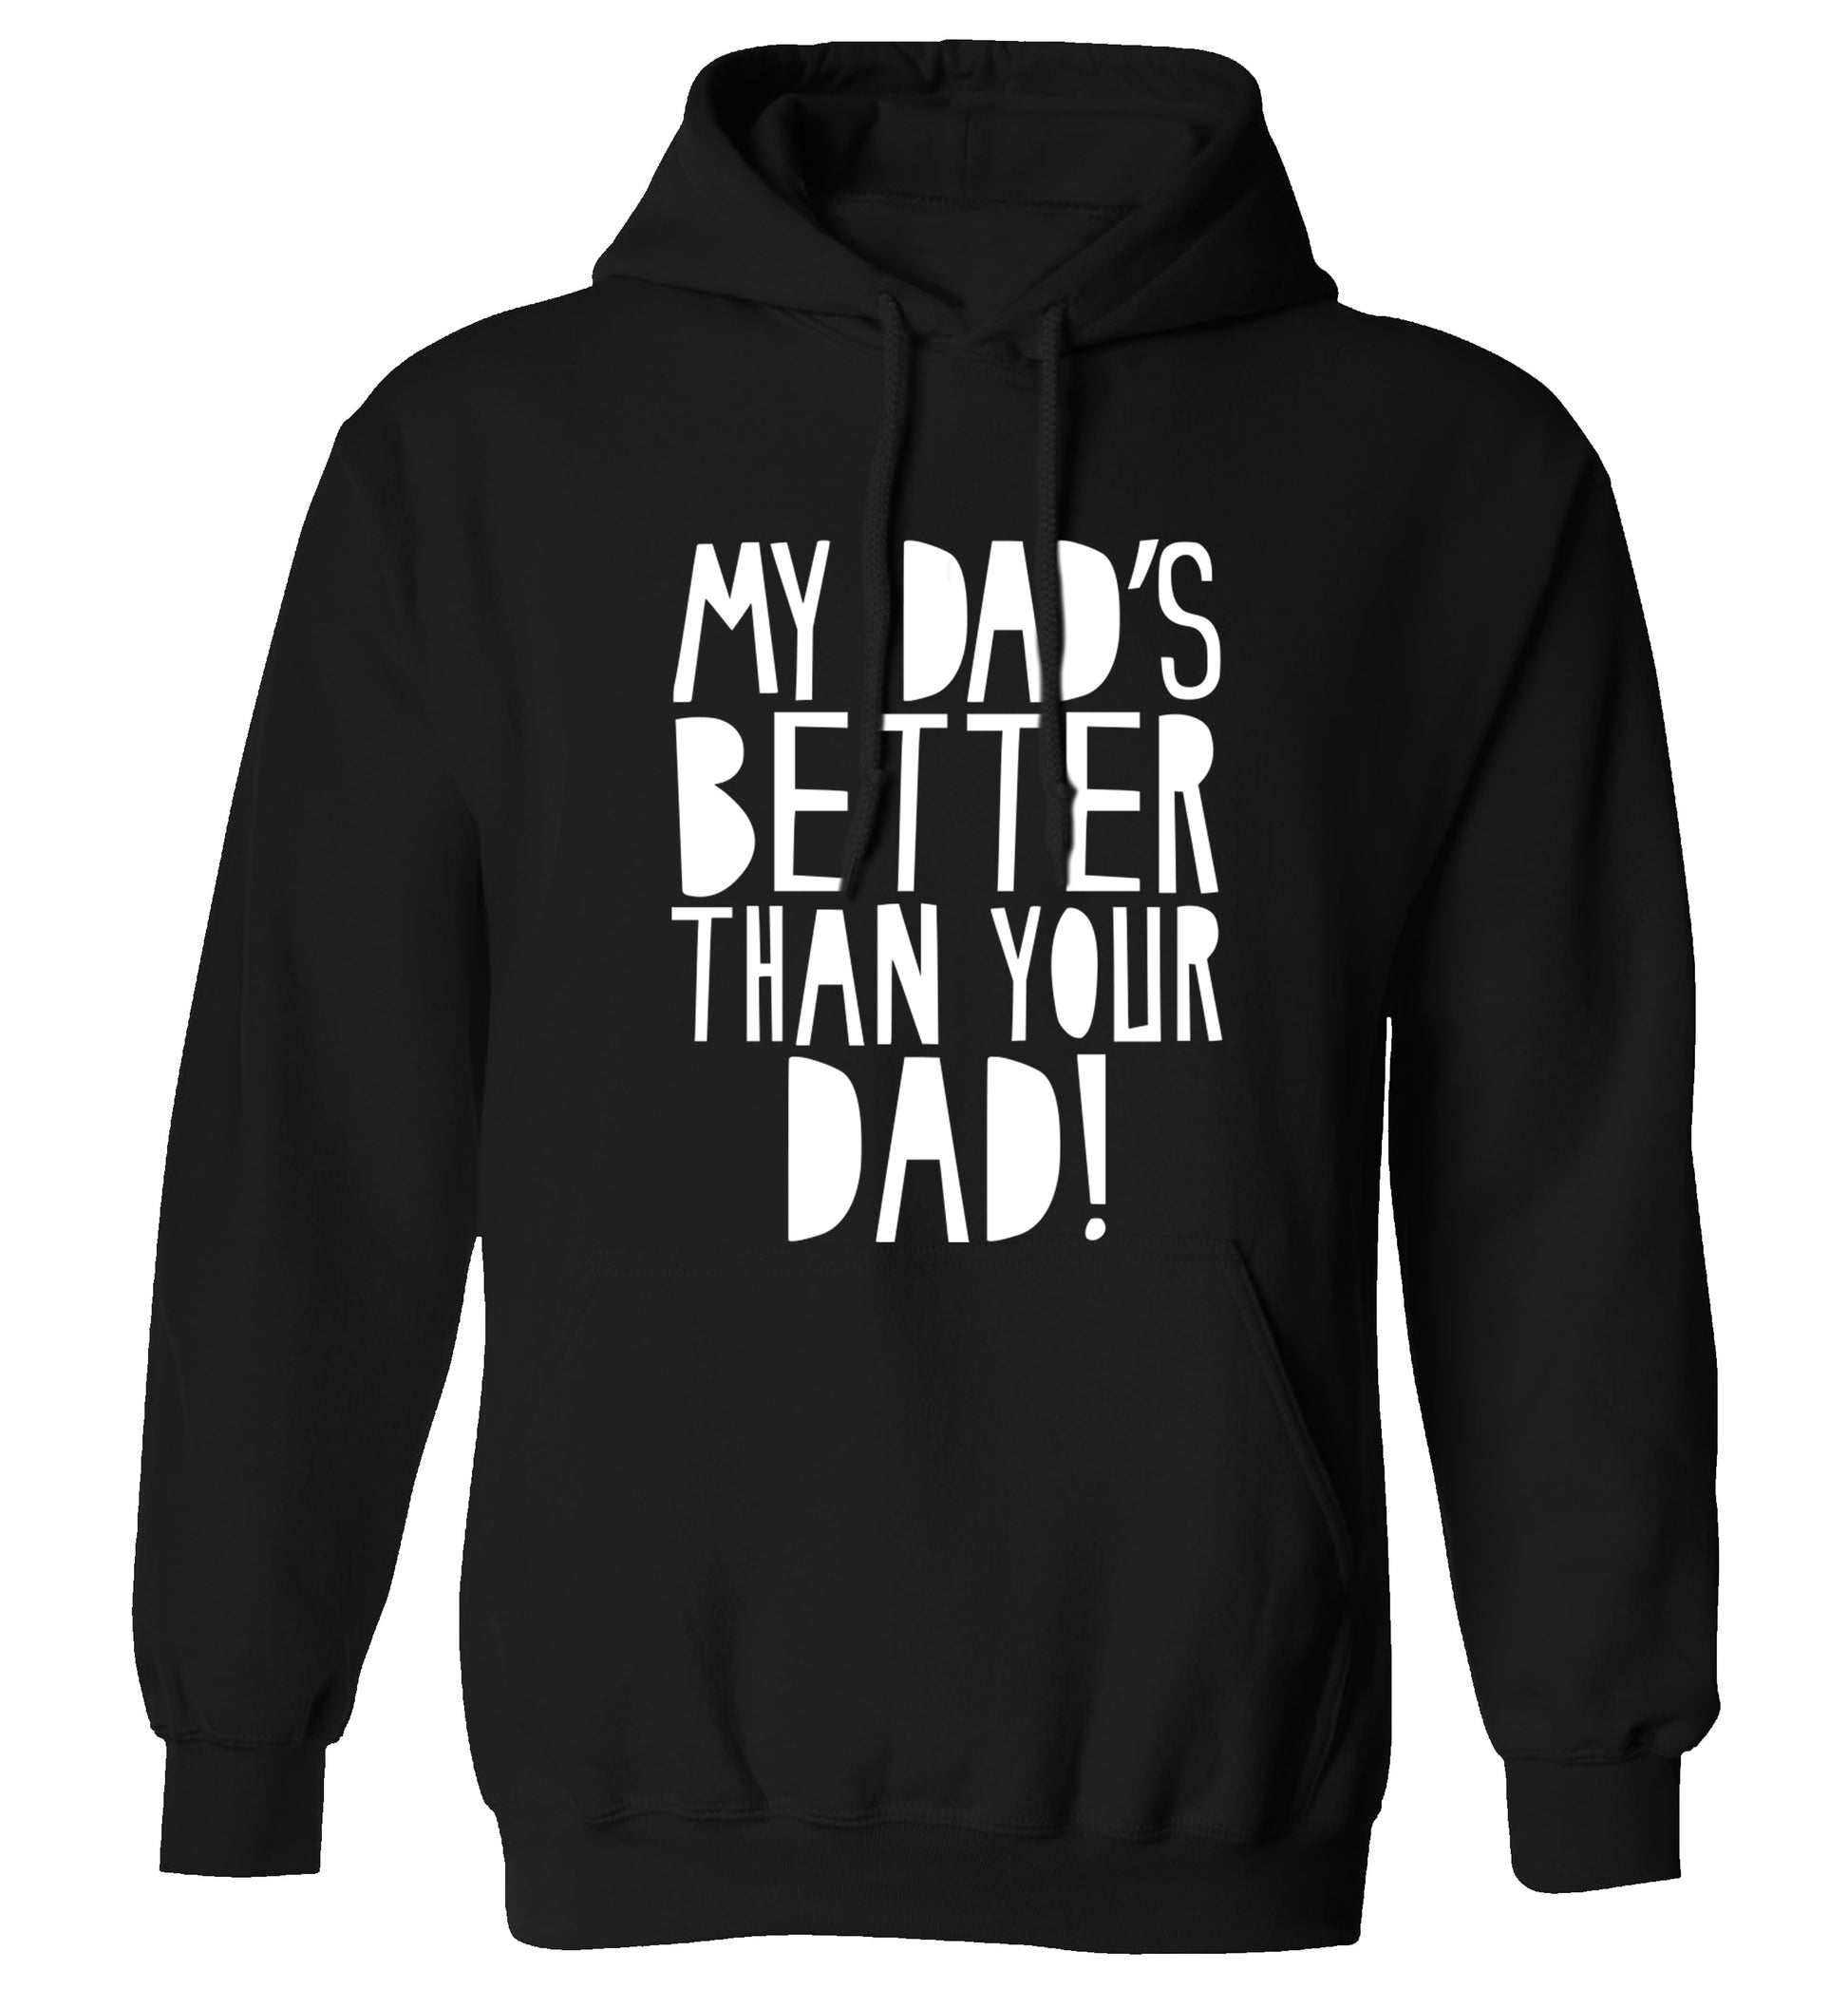 My dad's better than your dad adults unisex black hoodie 2XL